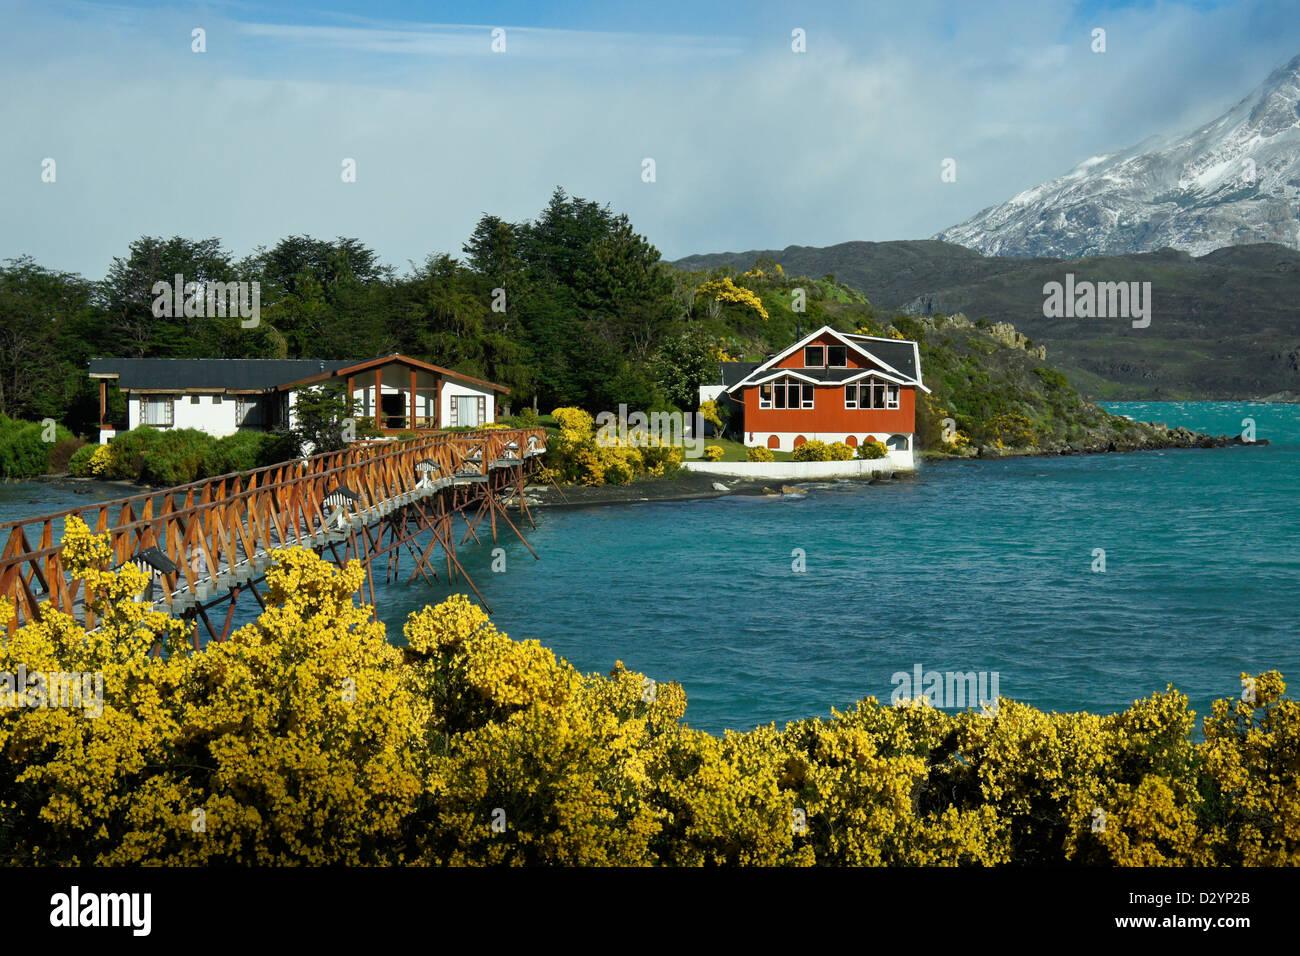 Hosteria Pehoe am Lago Pehoe, Torres del Paine Nationalpark, Patagonien, Chile Stockfoto